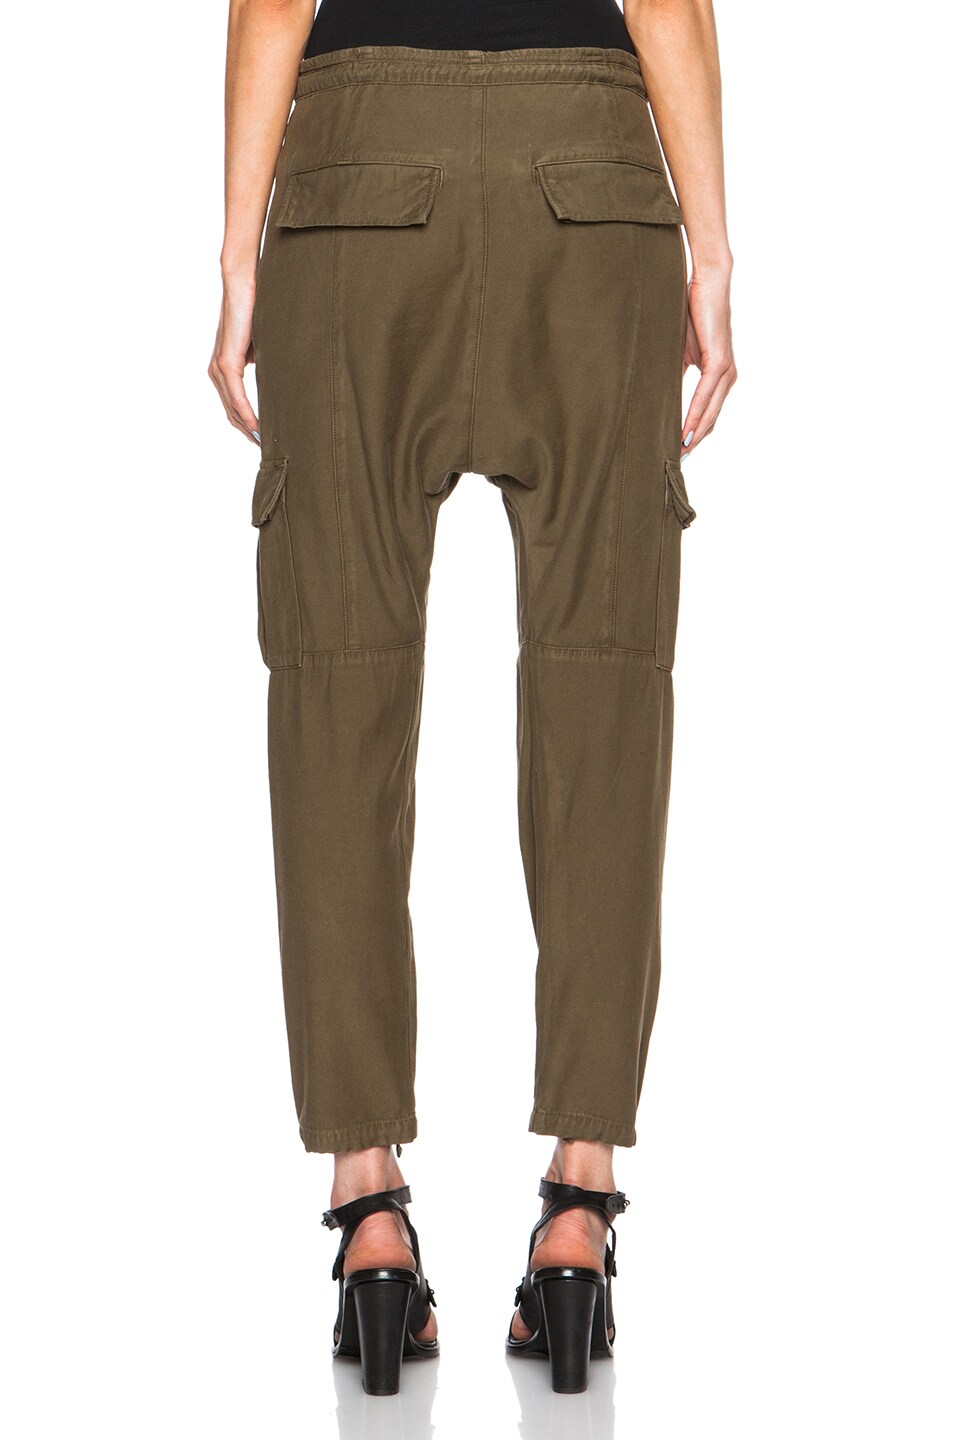 Citizens of Humanity Casbah Cargo Pants in Vintage Fatigue | FWRD